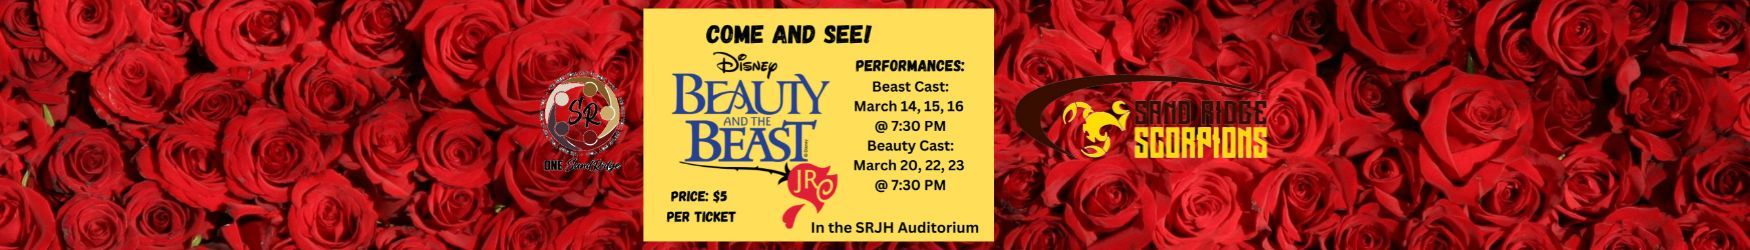 Beauty and the Beast Play Information 7pm March 14 15 16 20 22 23